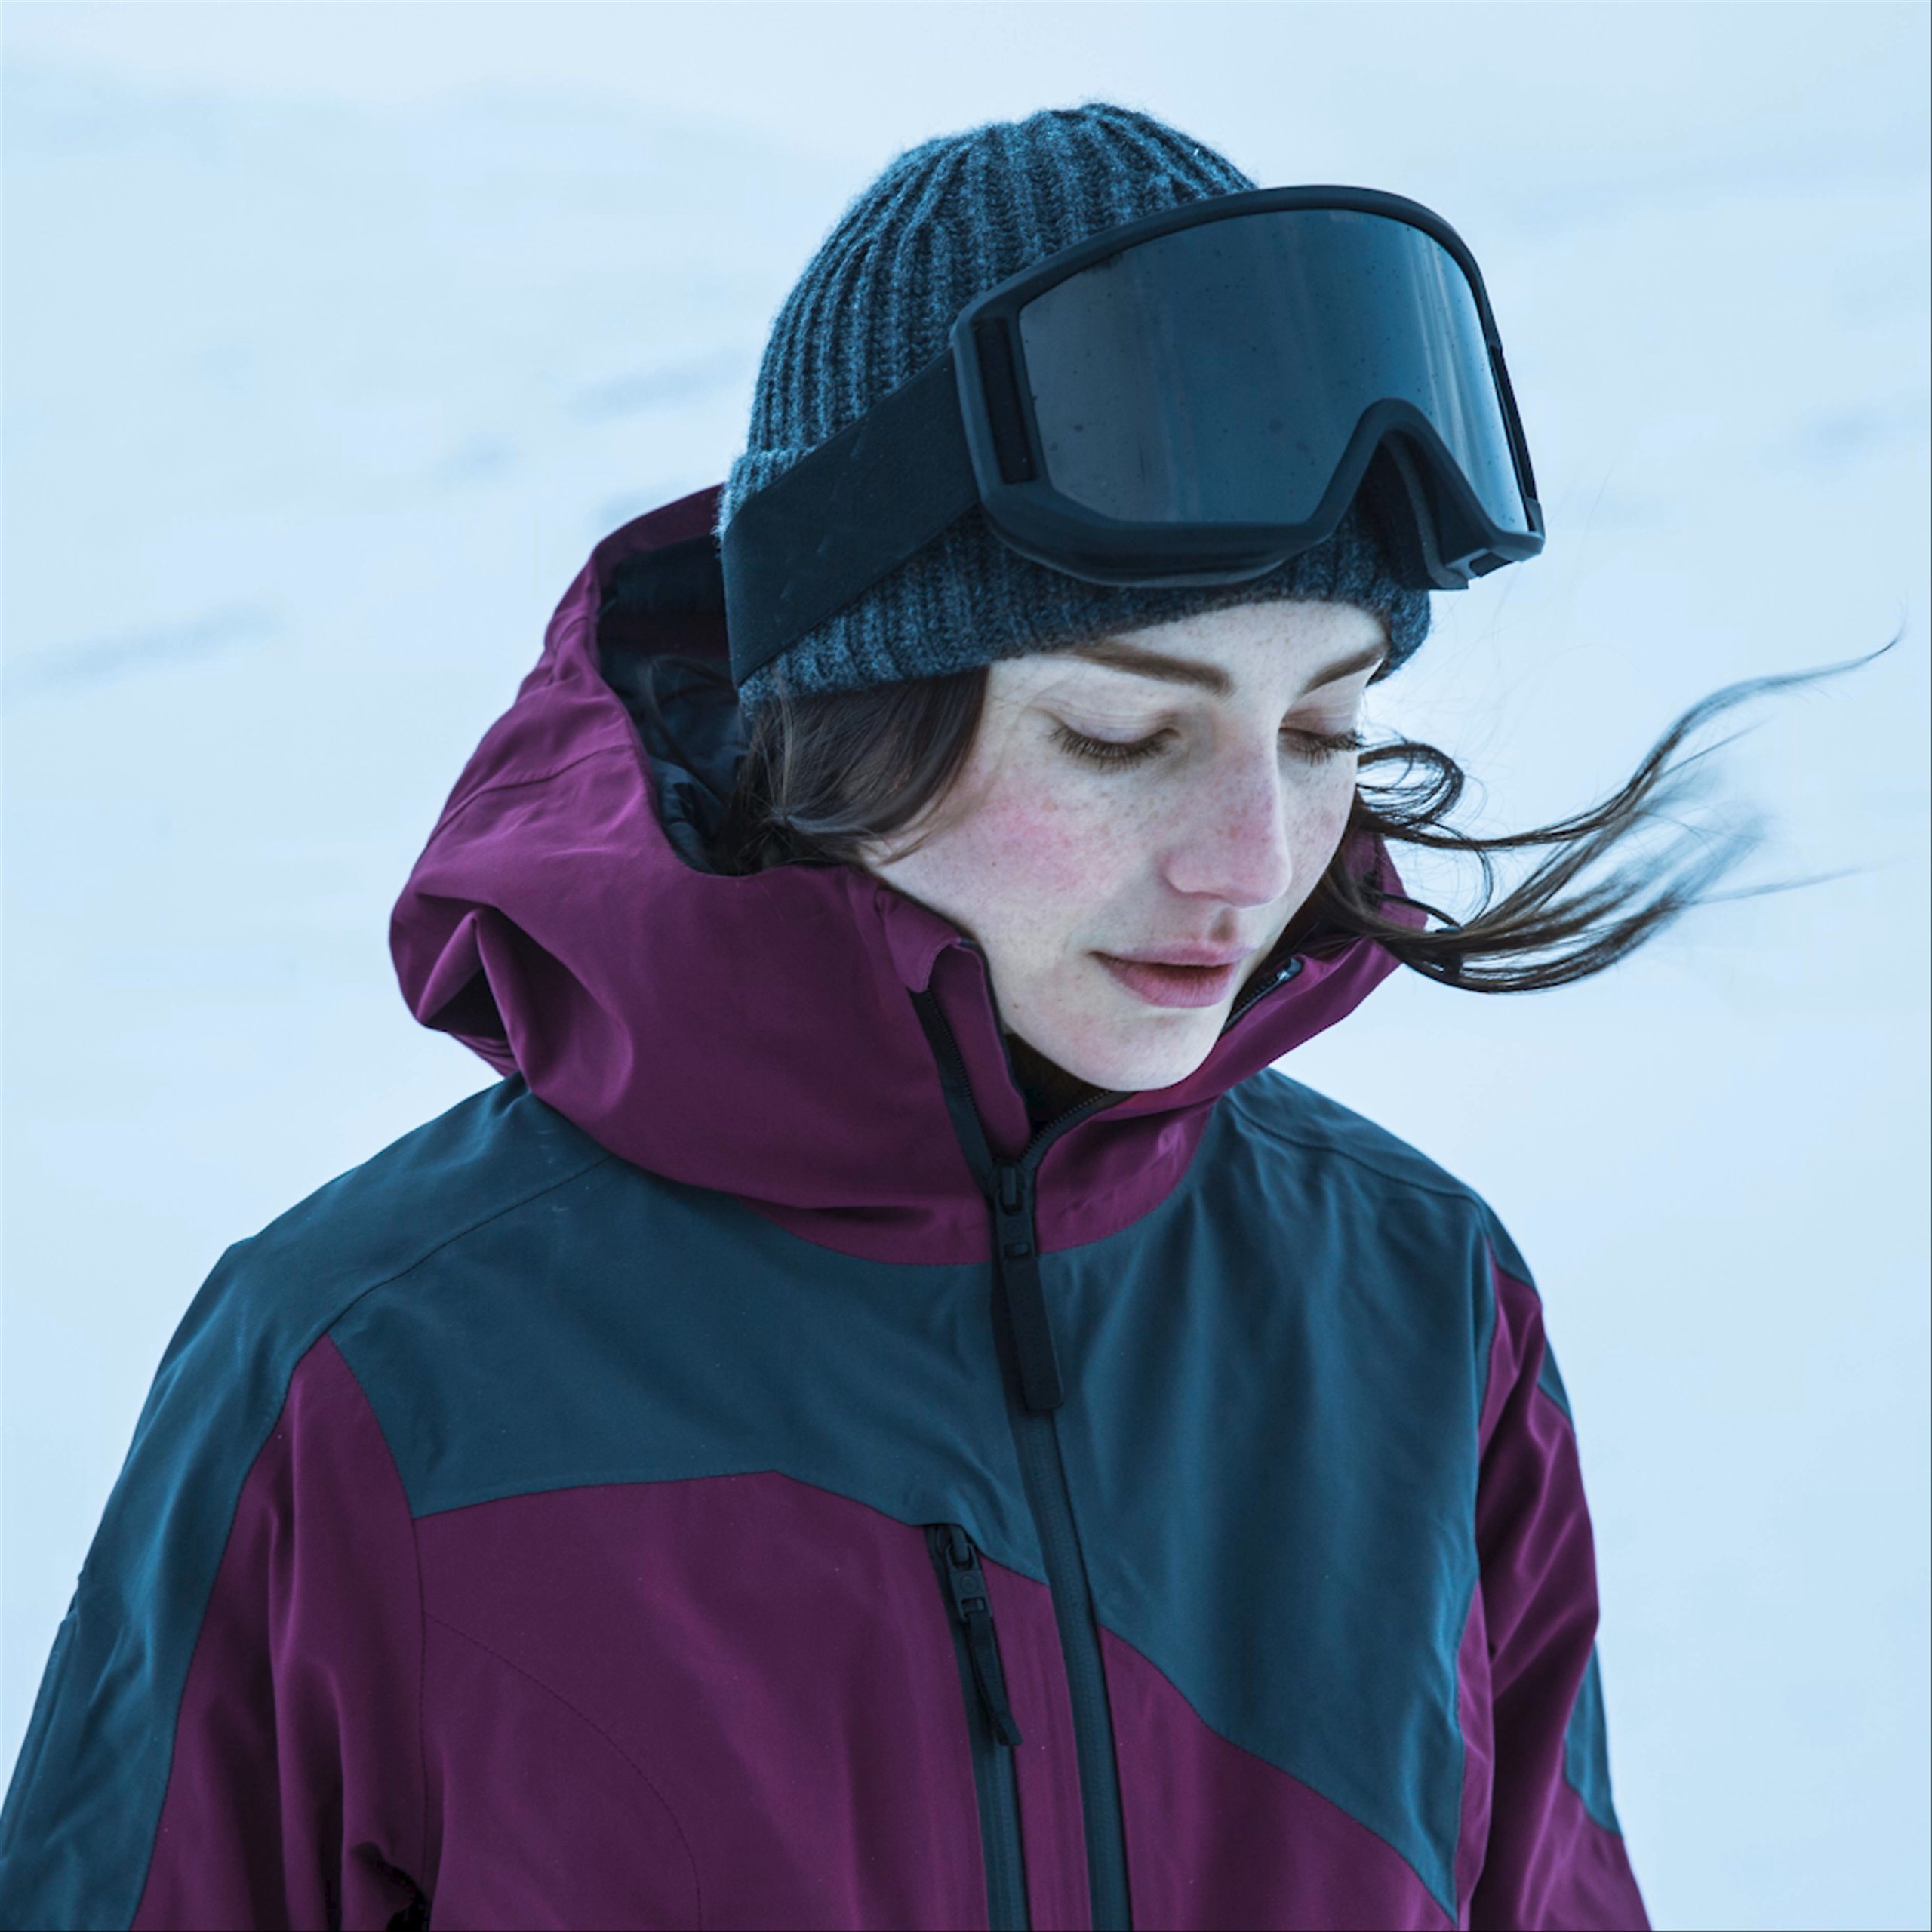 Slideshow of men and women wearing Aether gear in Alaska, Iceland, Chamonix and Aspen